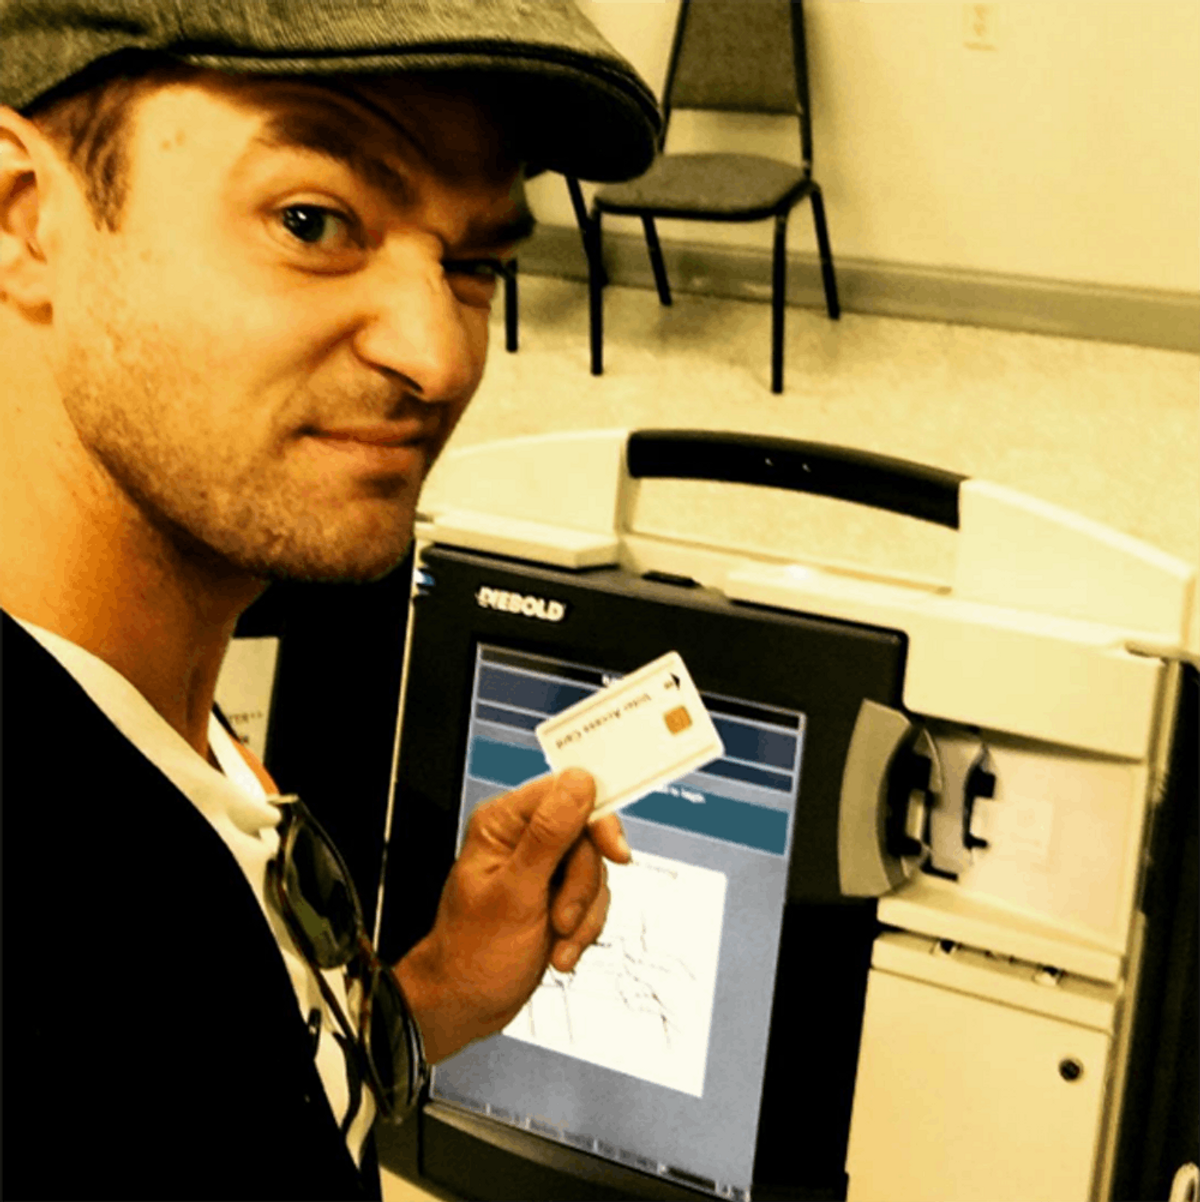 PSA: A Selfie With Your Election Ballot Is Probably a Terrible Idea